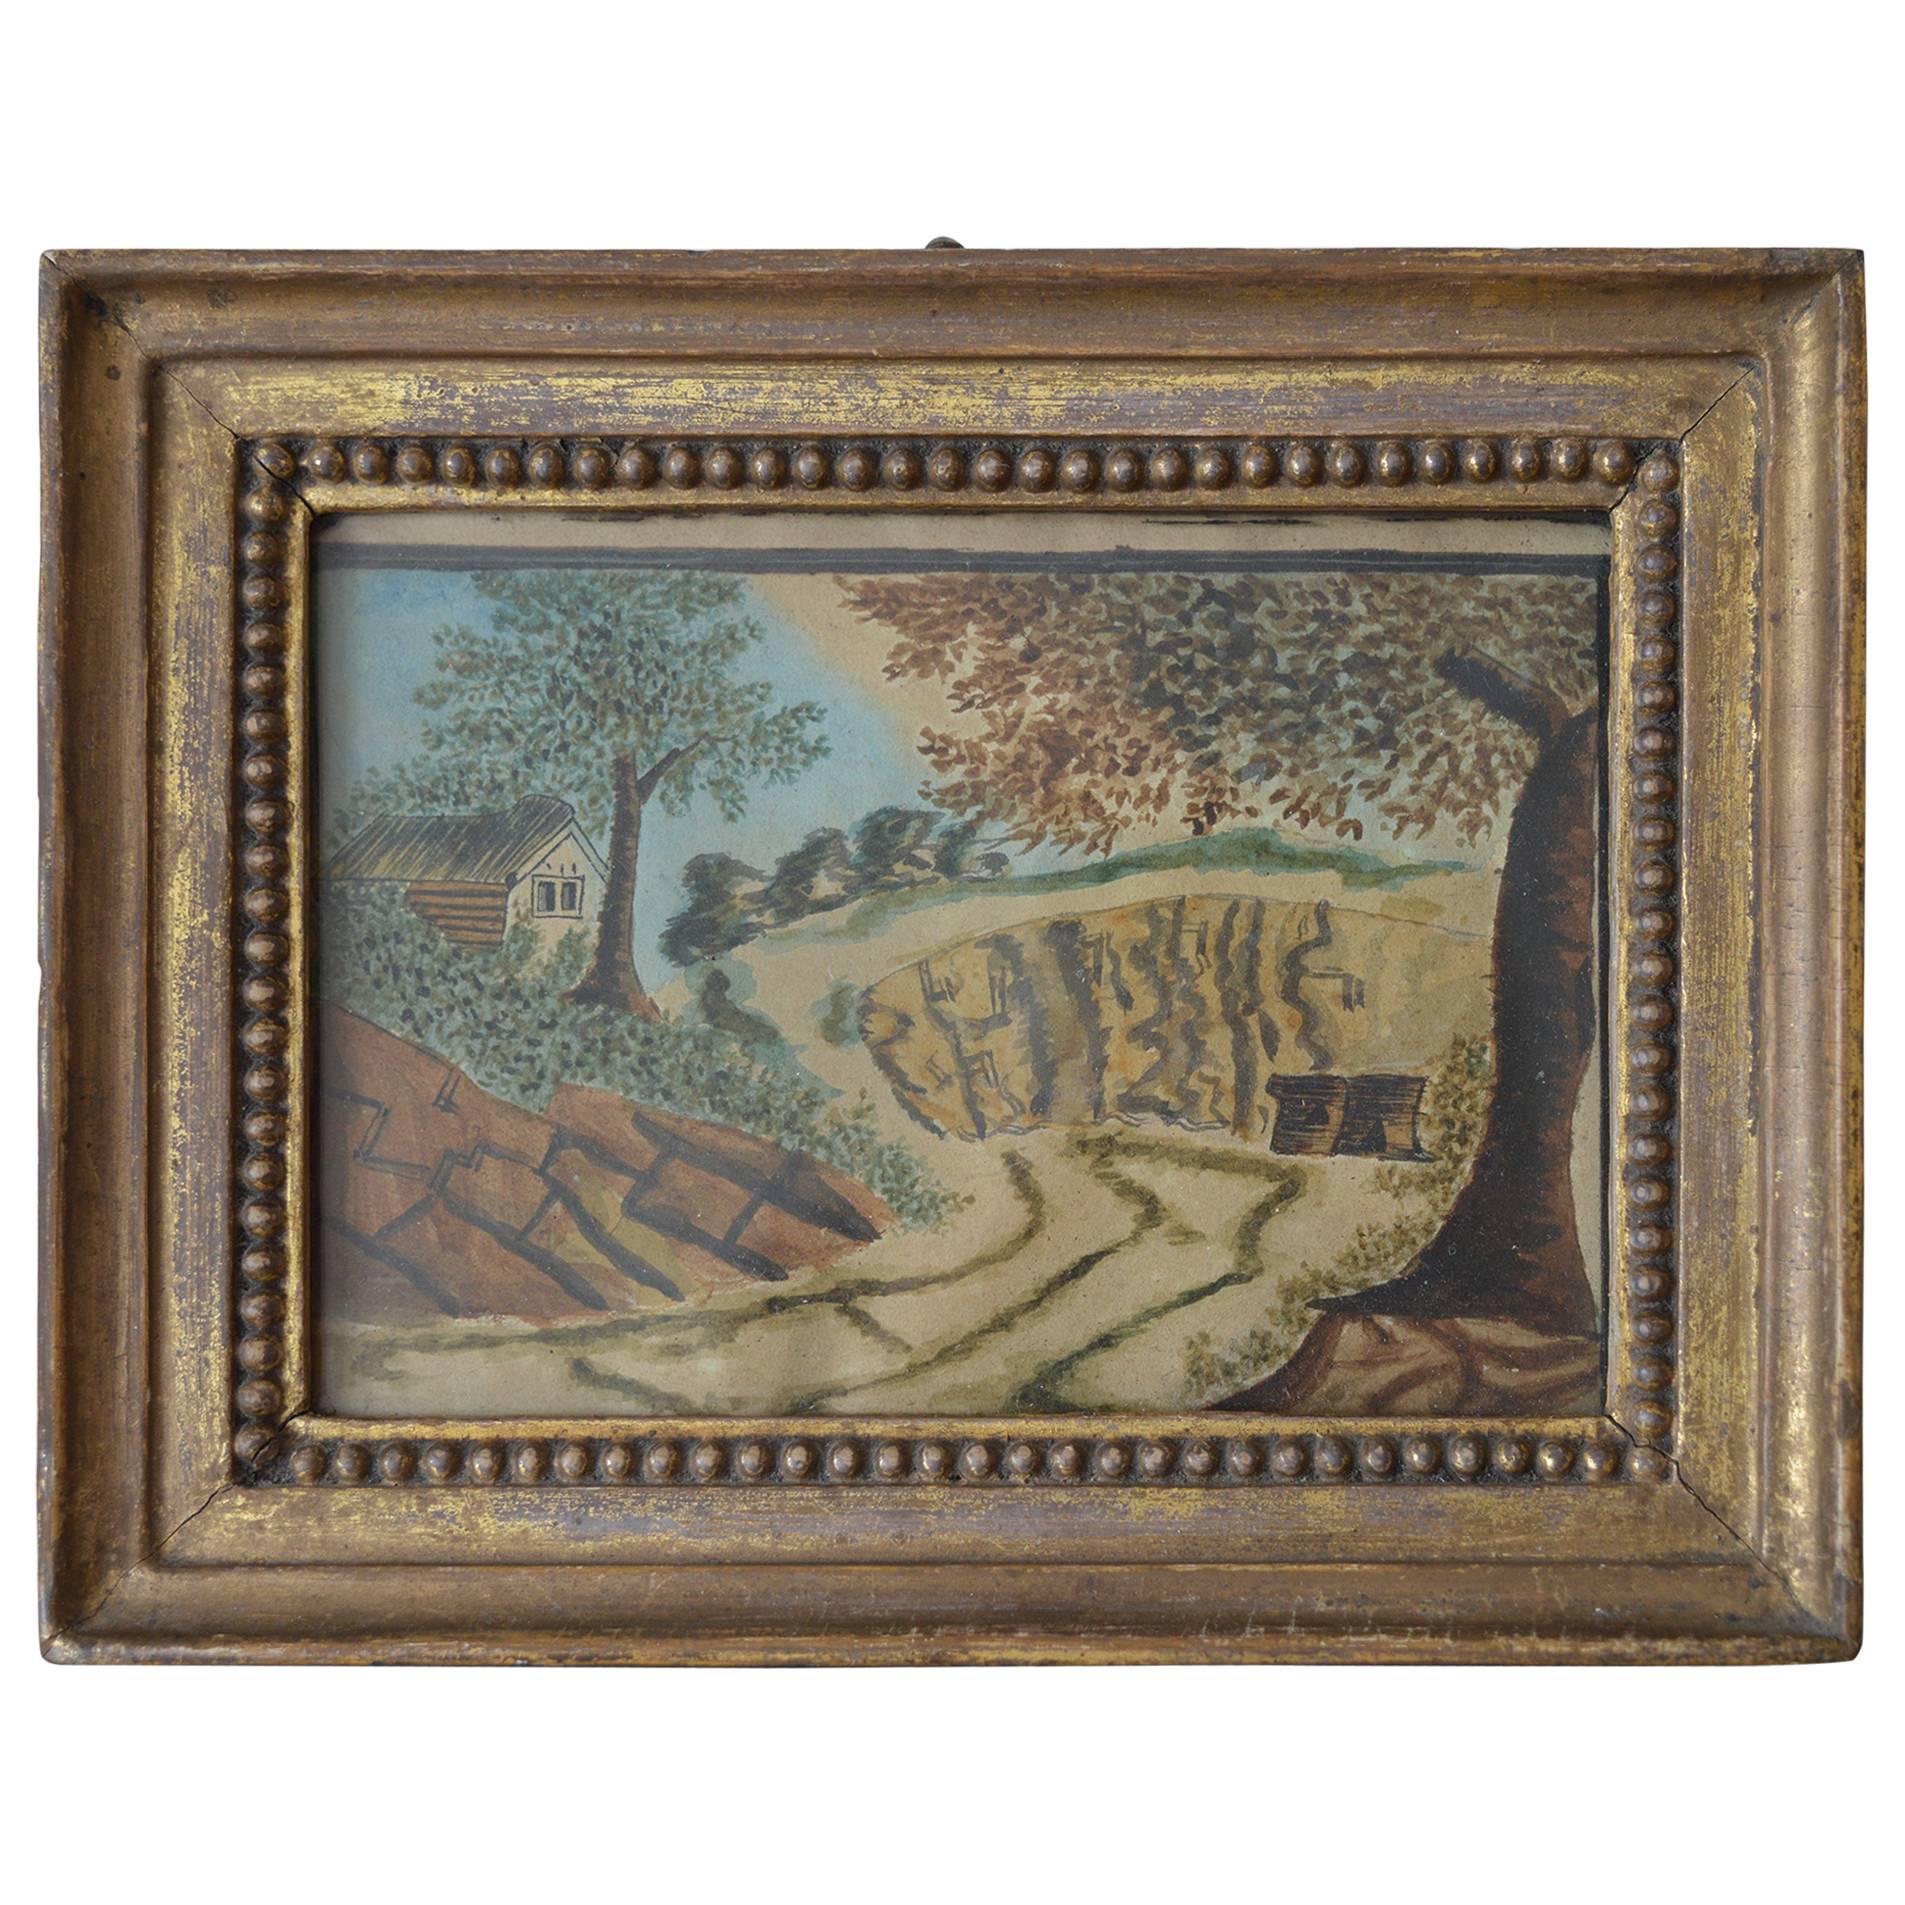 Primitive Painting of an English Landscape, Early 19th Century